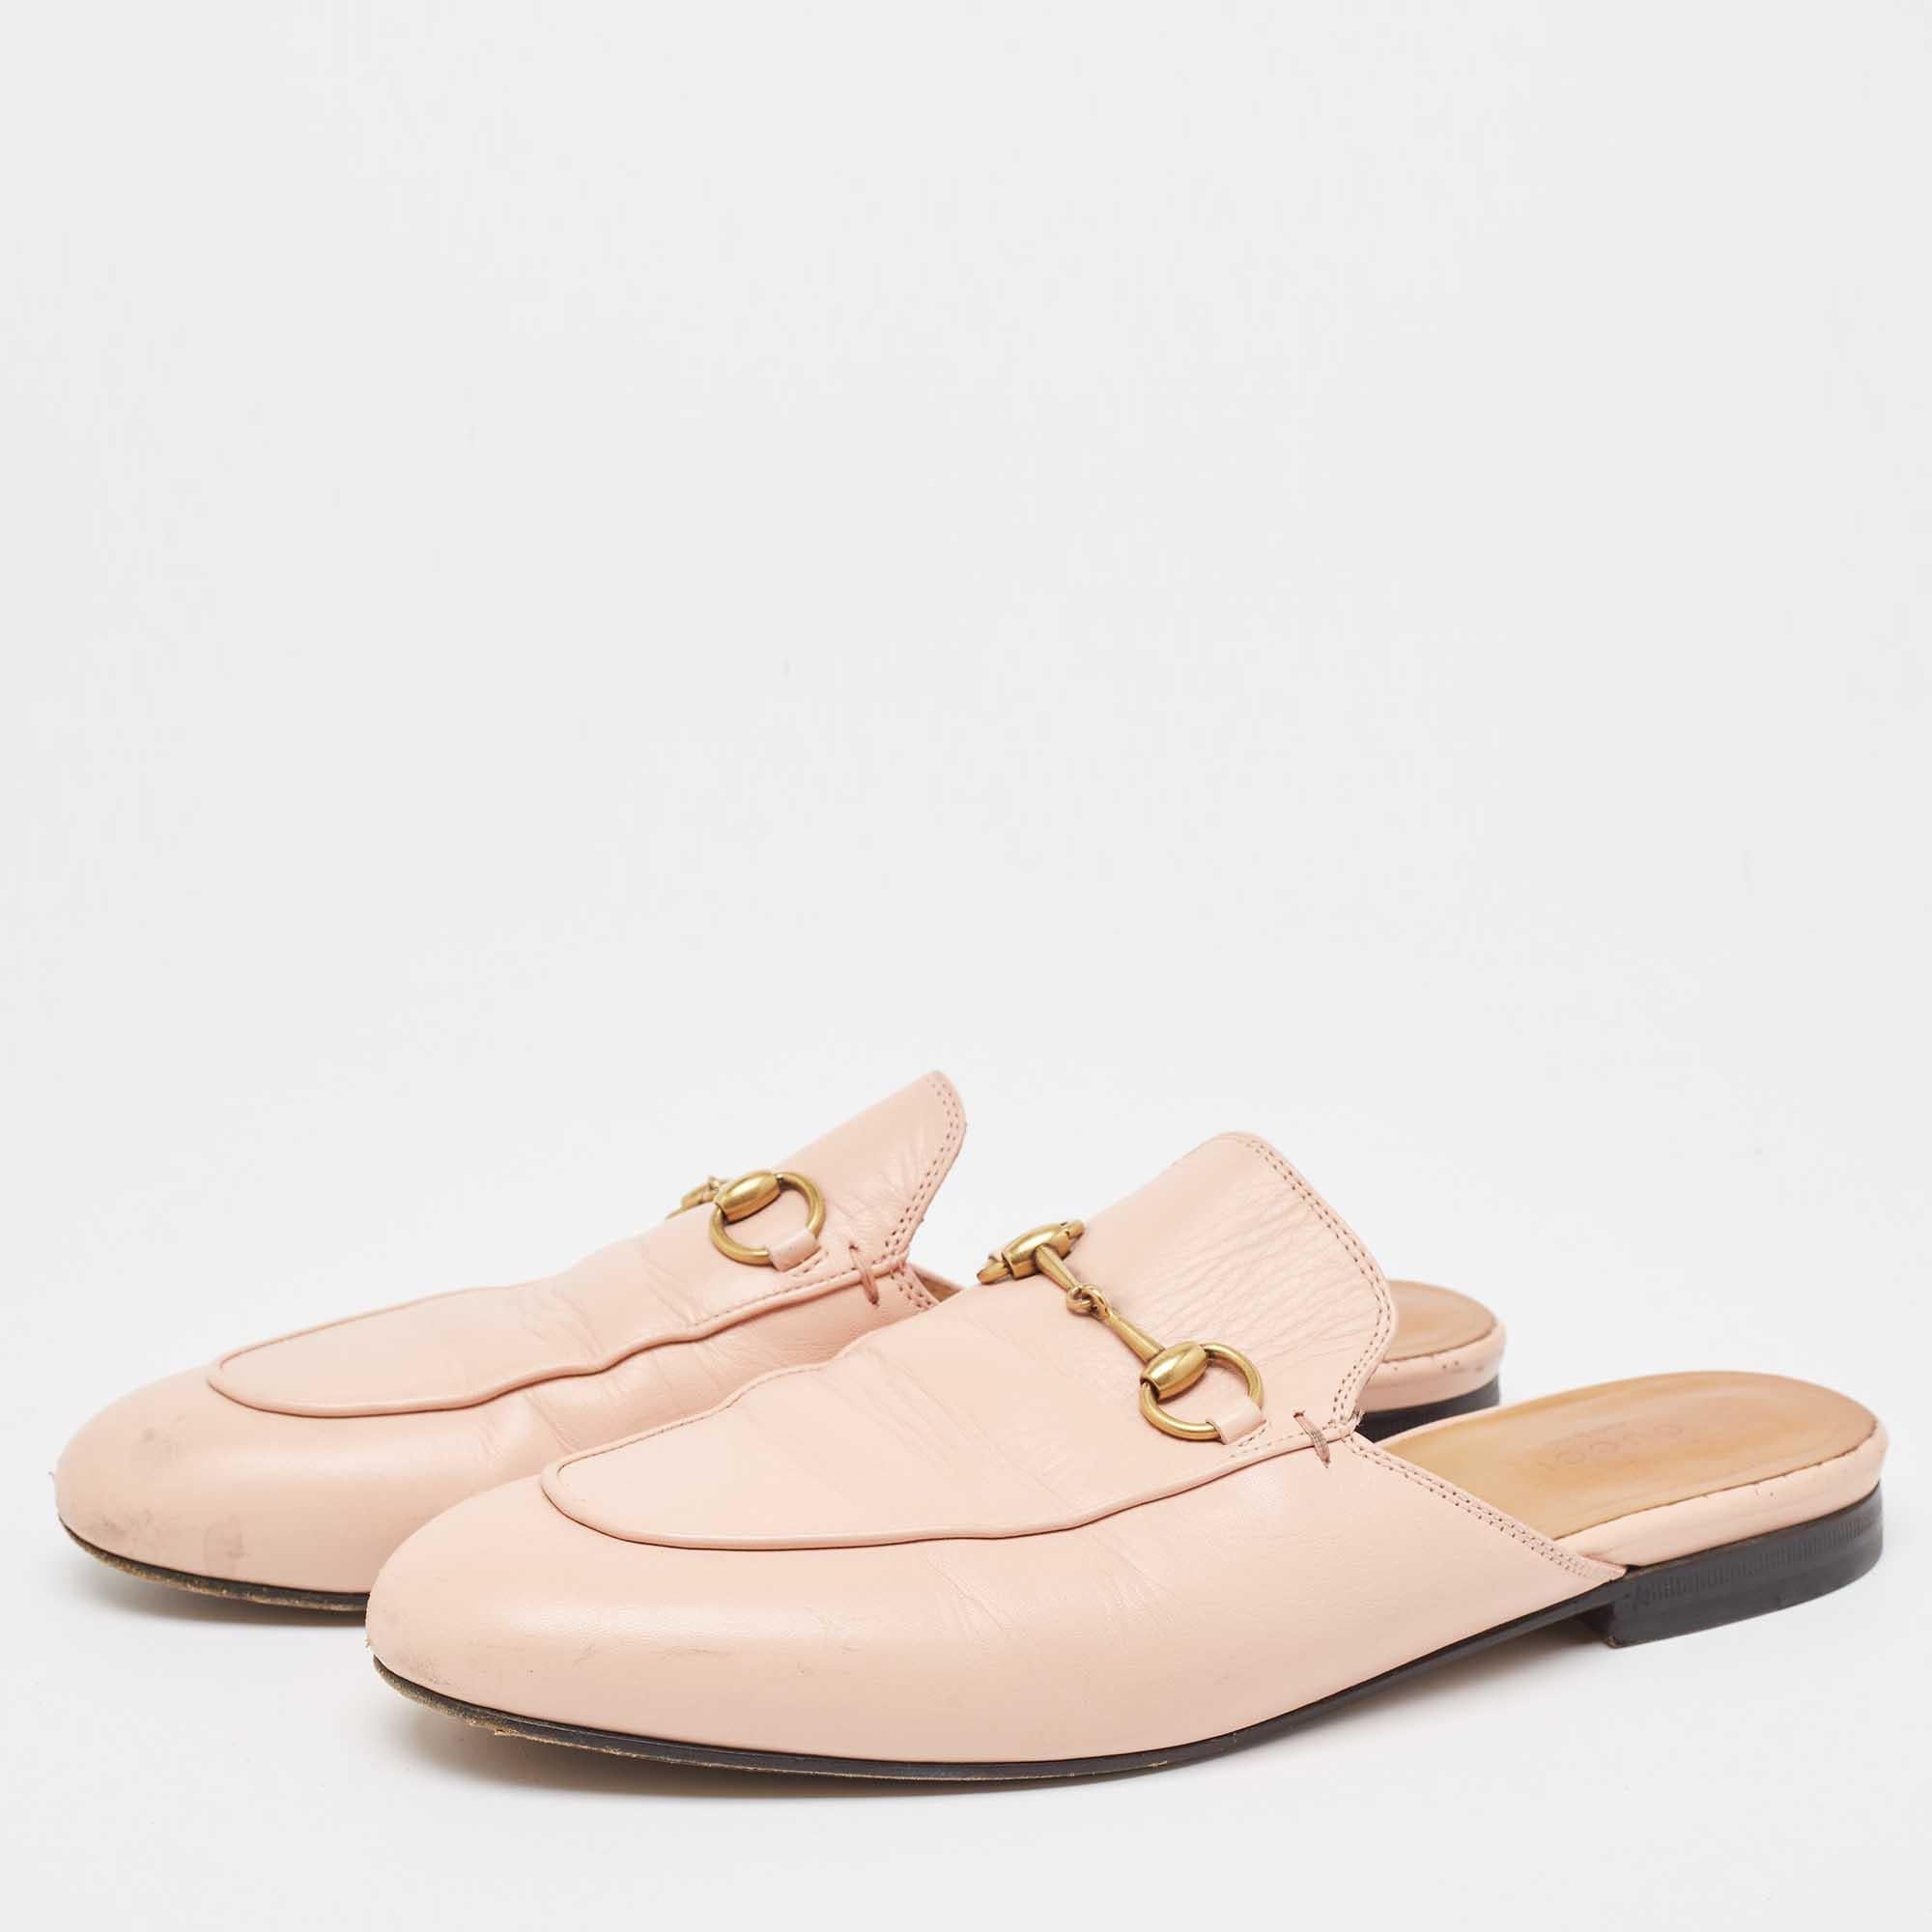 Gucci Pink Leather Princetown Flat Mules Size 39 For Sale 5